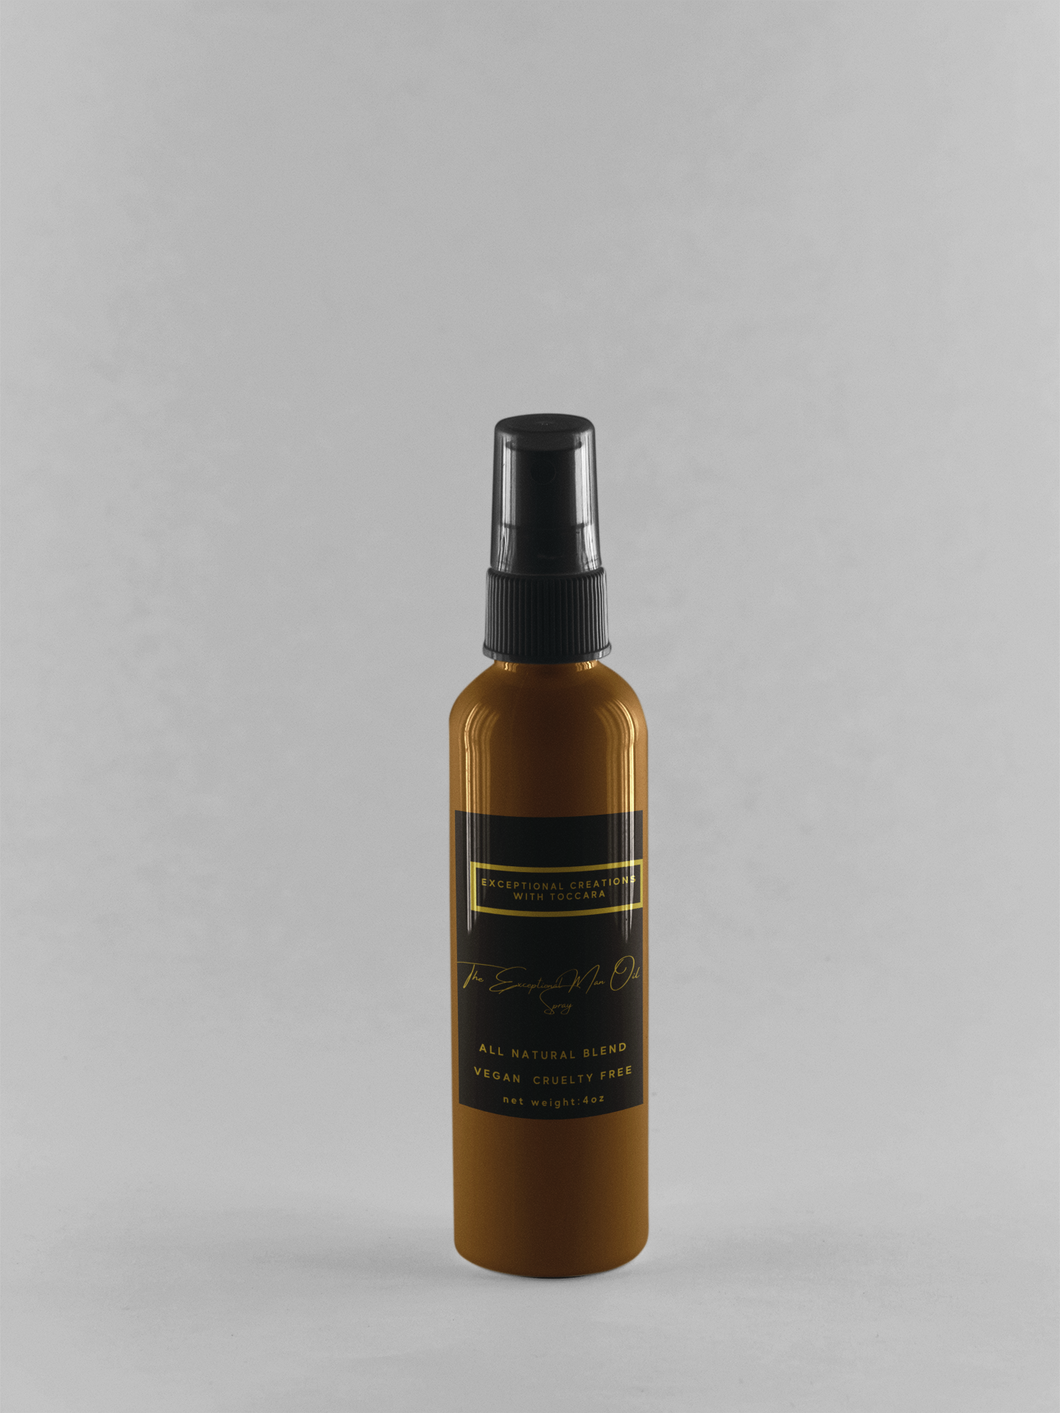 The Exceptional Man Oil Spray